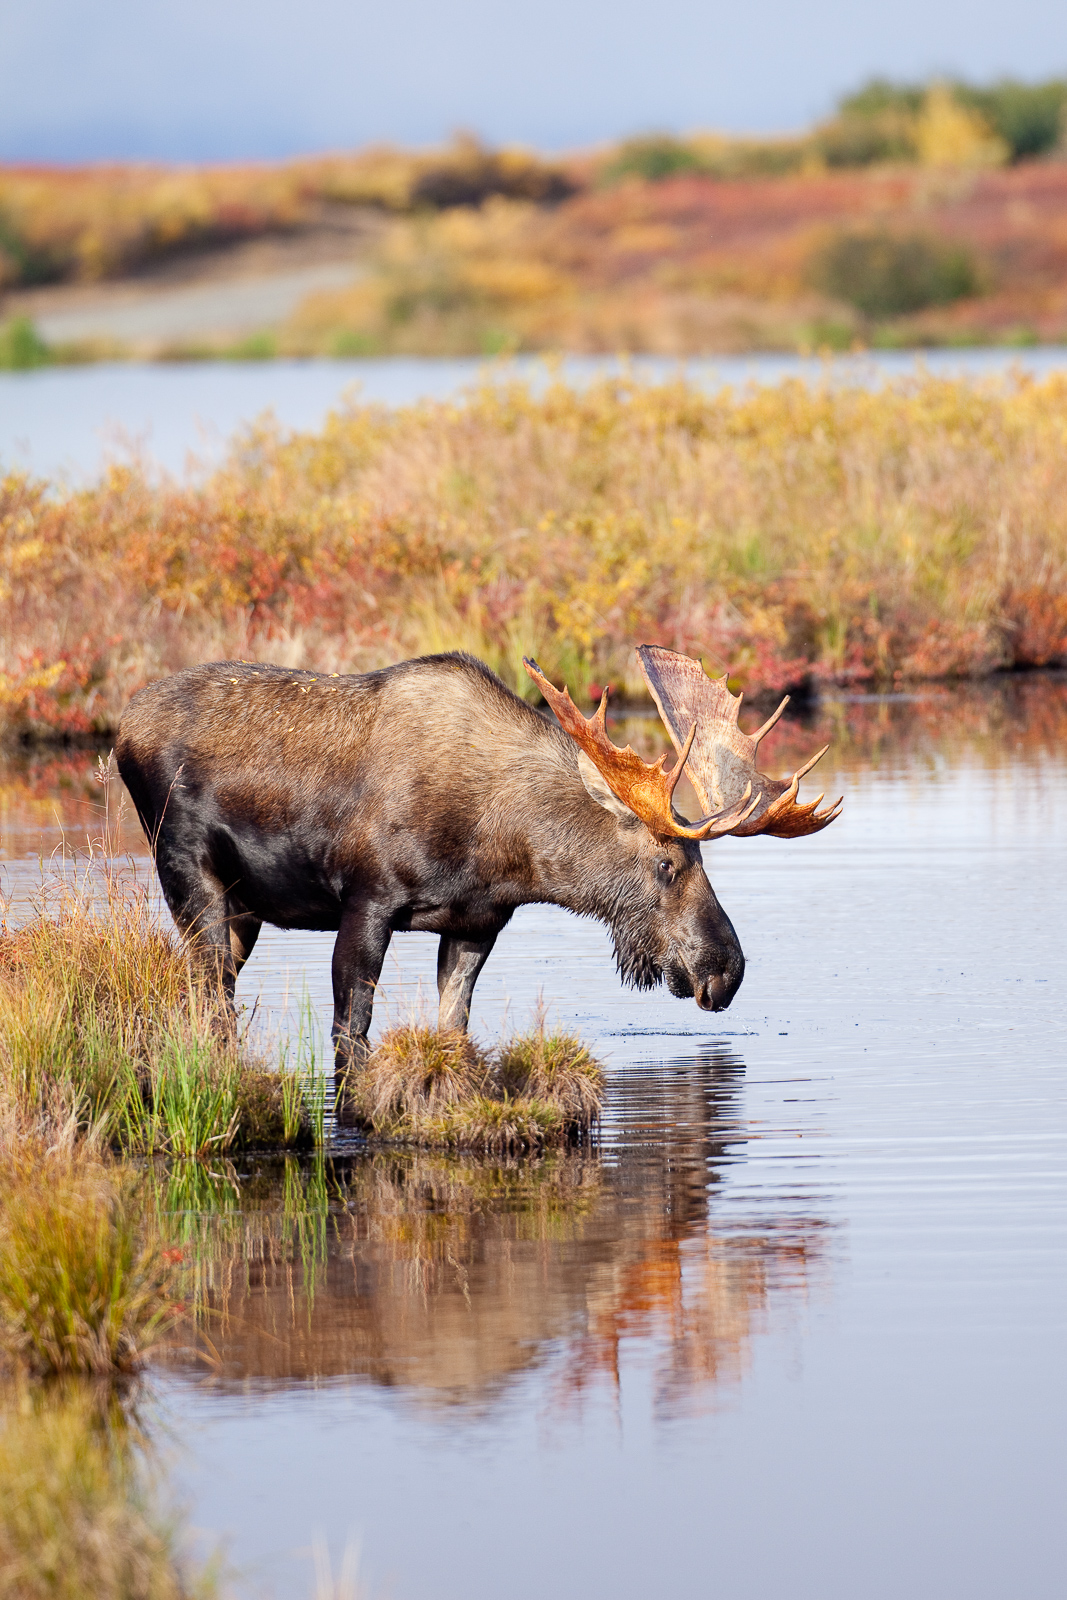 Fresh pond waters in the tundra make a savory drink for this moose and a chance to look into ones self in the mirror like reflections...